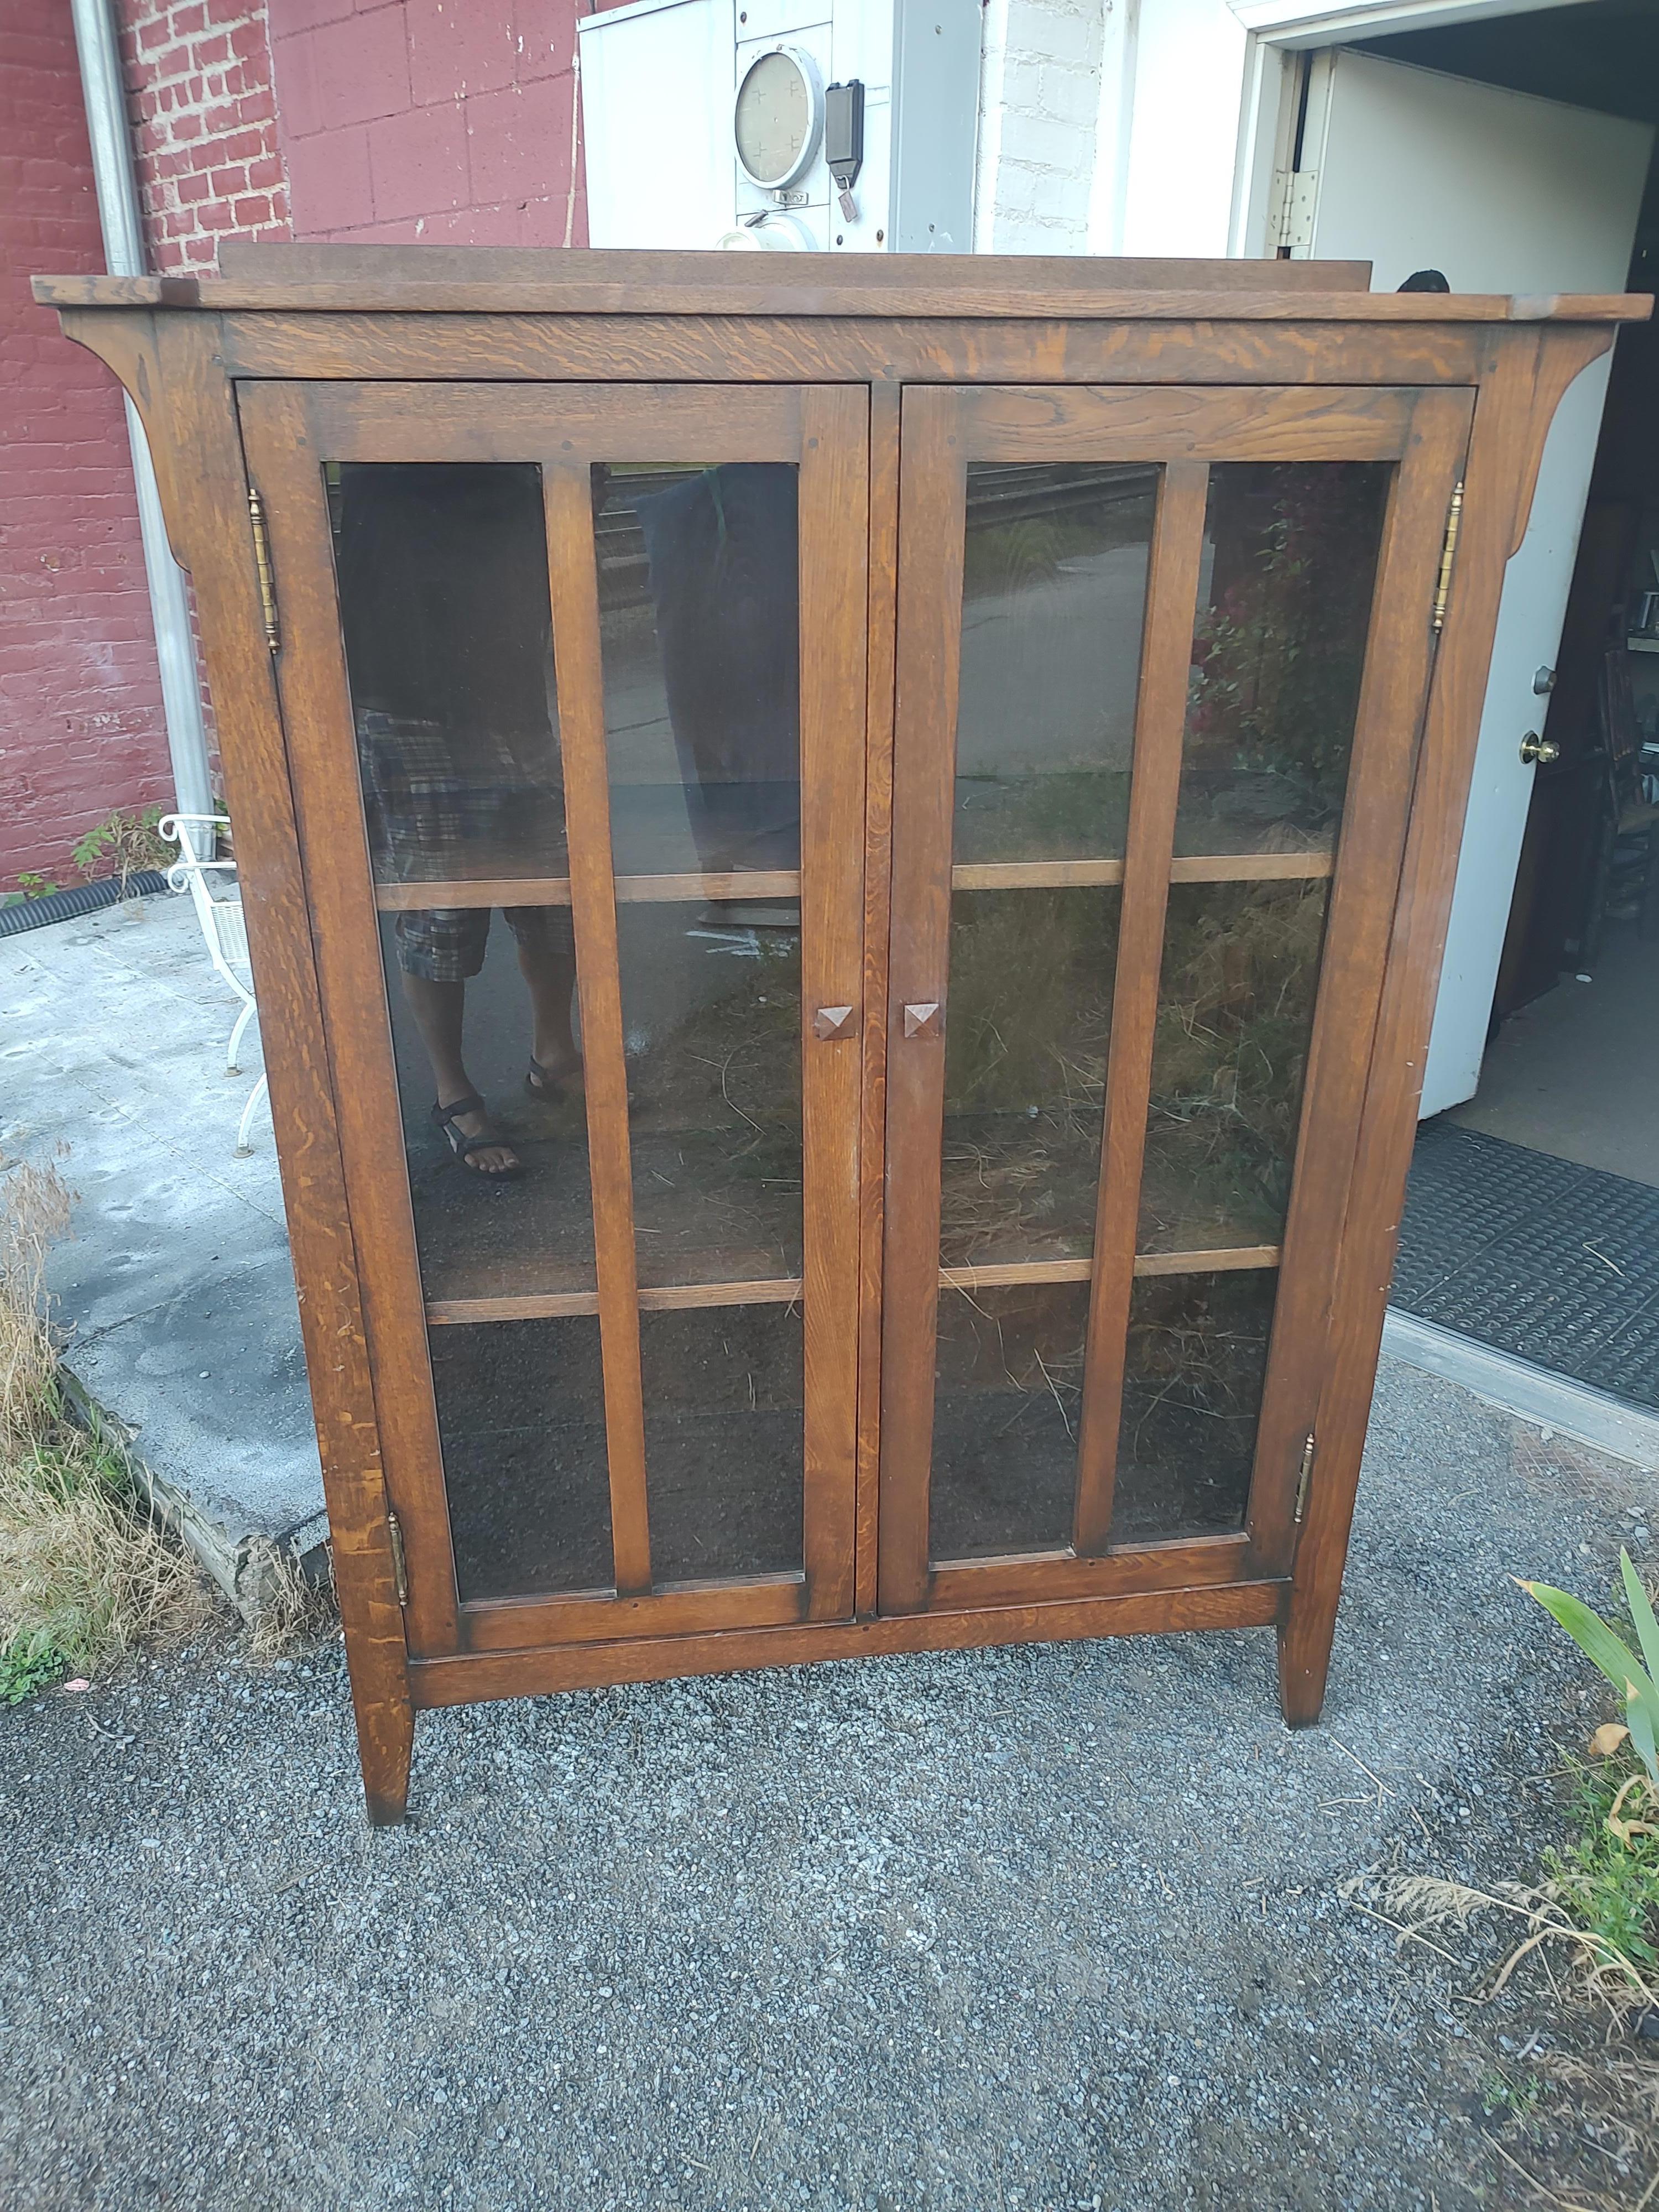 Great style and size in this Mission Arts and Crafts Bookcase / China Closet. Created from oak the cabinet design roots were in the early part of the 19th century. All the arts & crafts details a big part of this bookcase design. Looks to be all